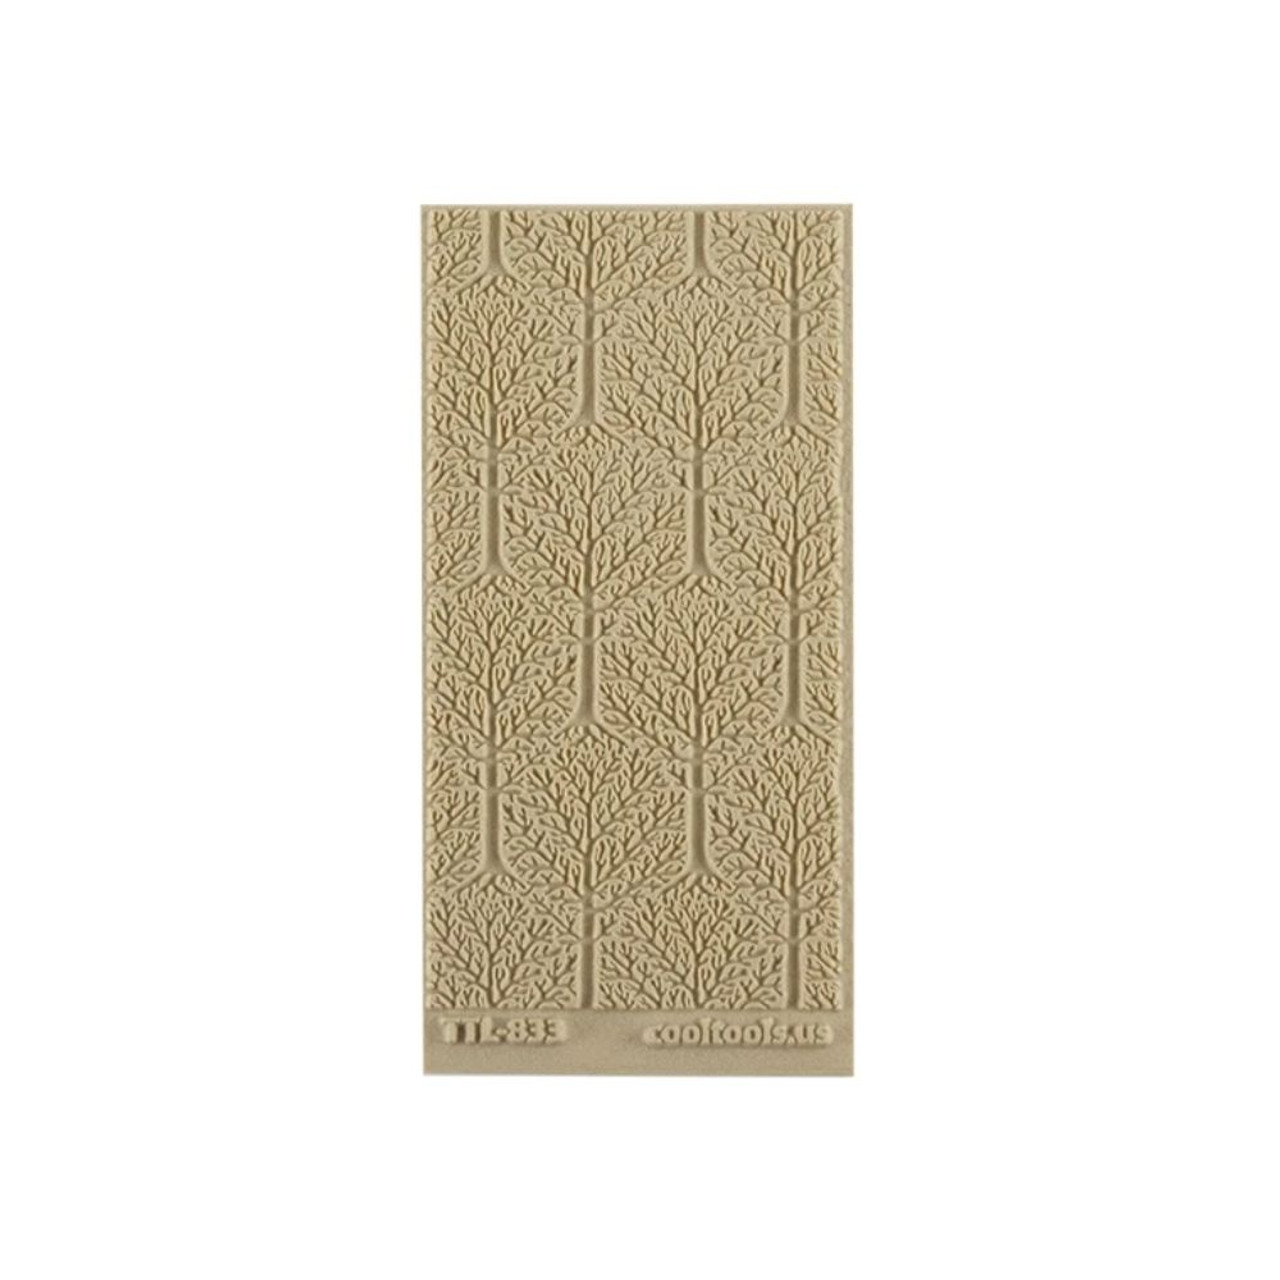 Texture Tile - Lost in the Woods Embossed